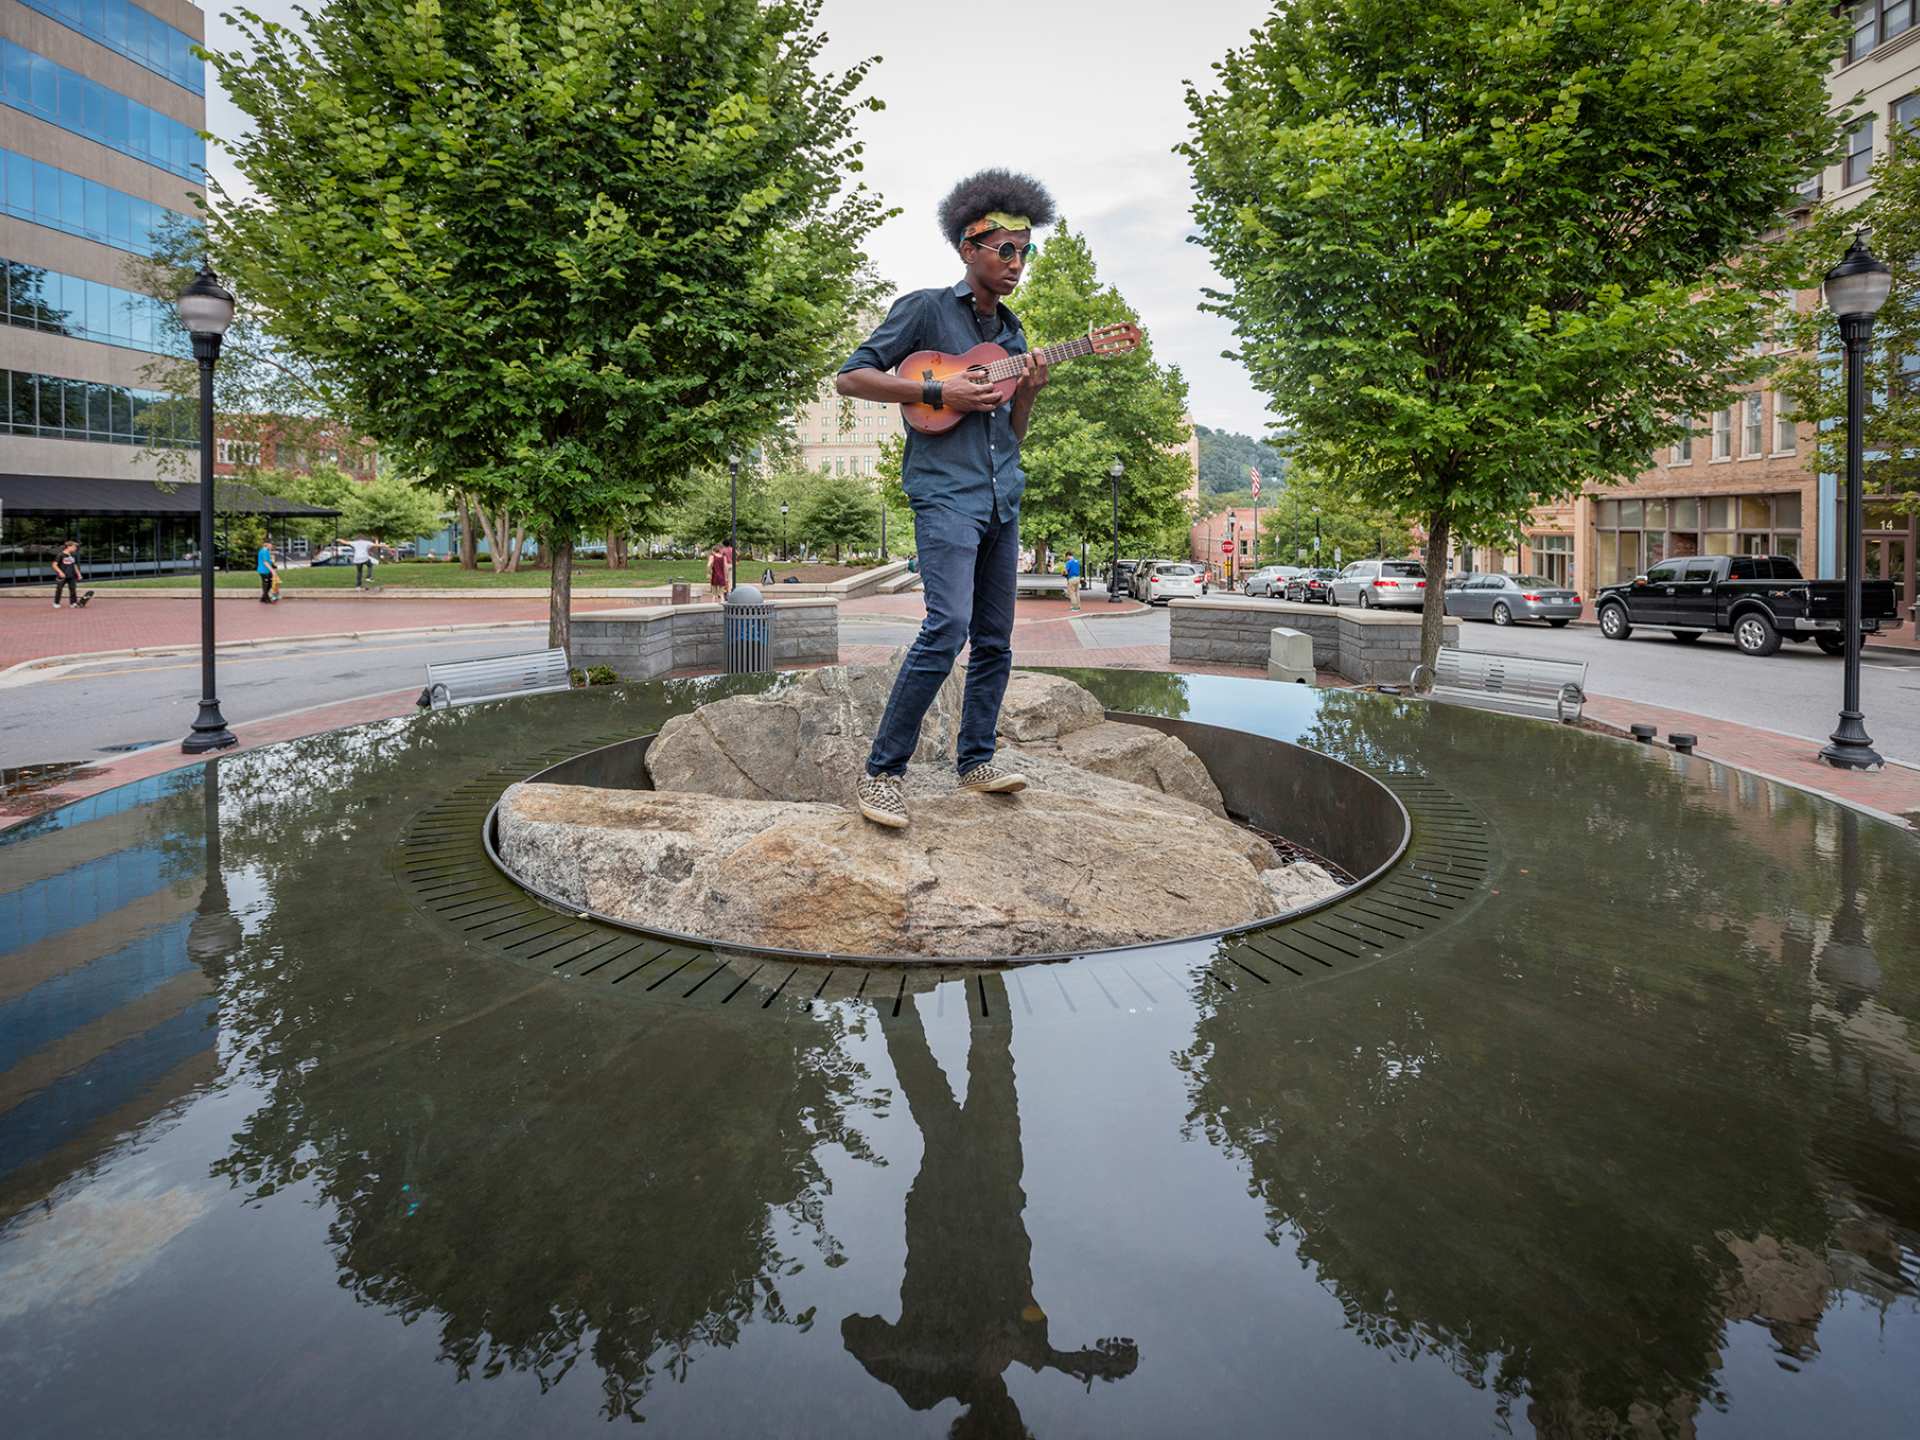 North Carolina | A street performer standing on rocks by water in downtown Asheville, North Carolina